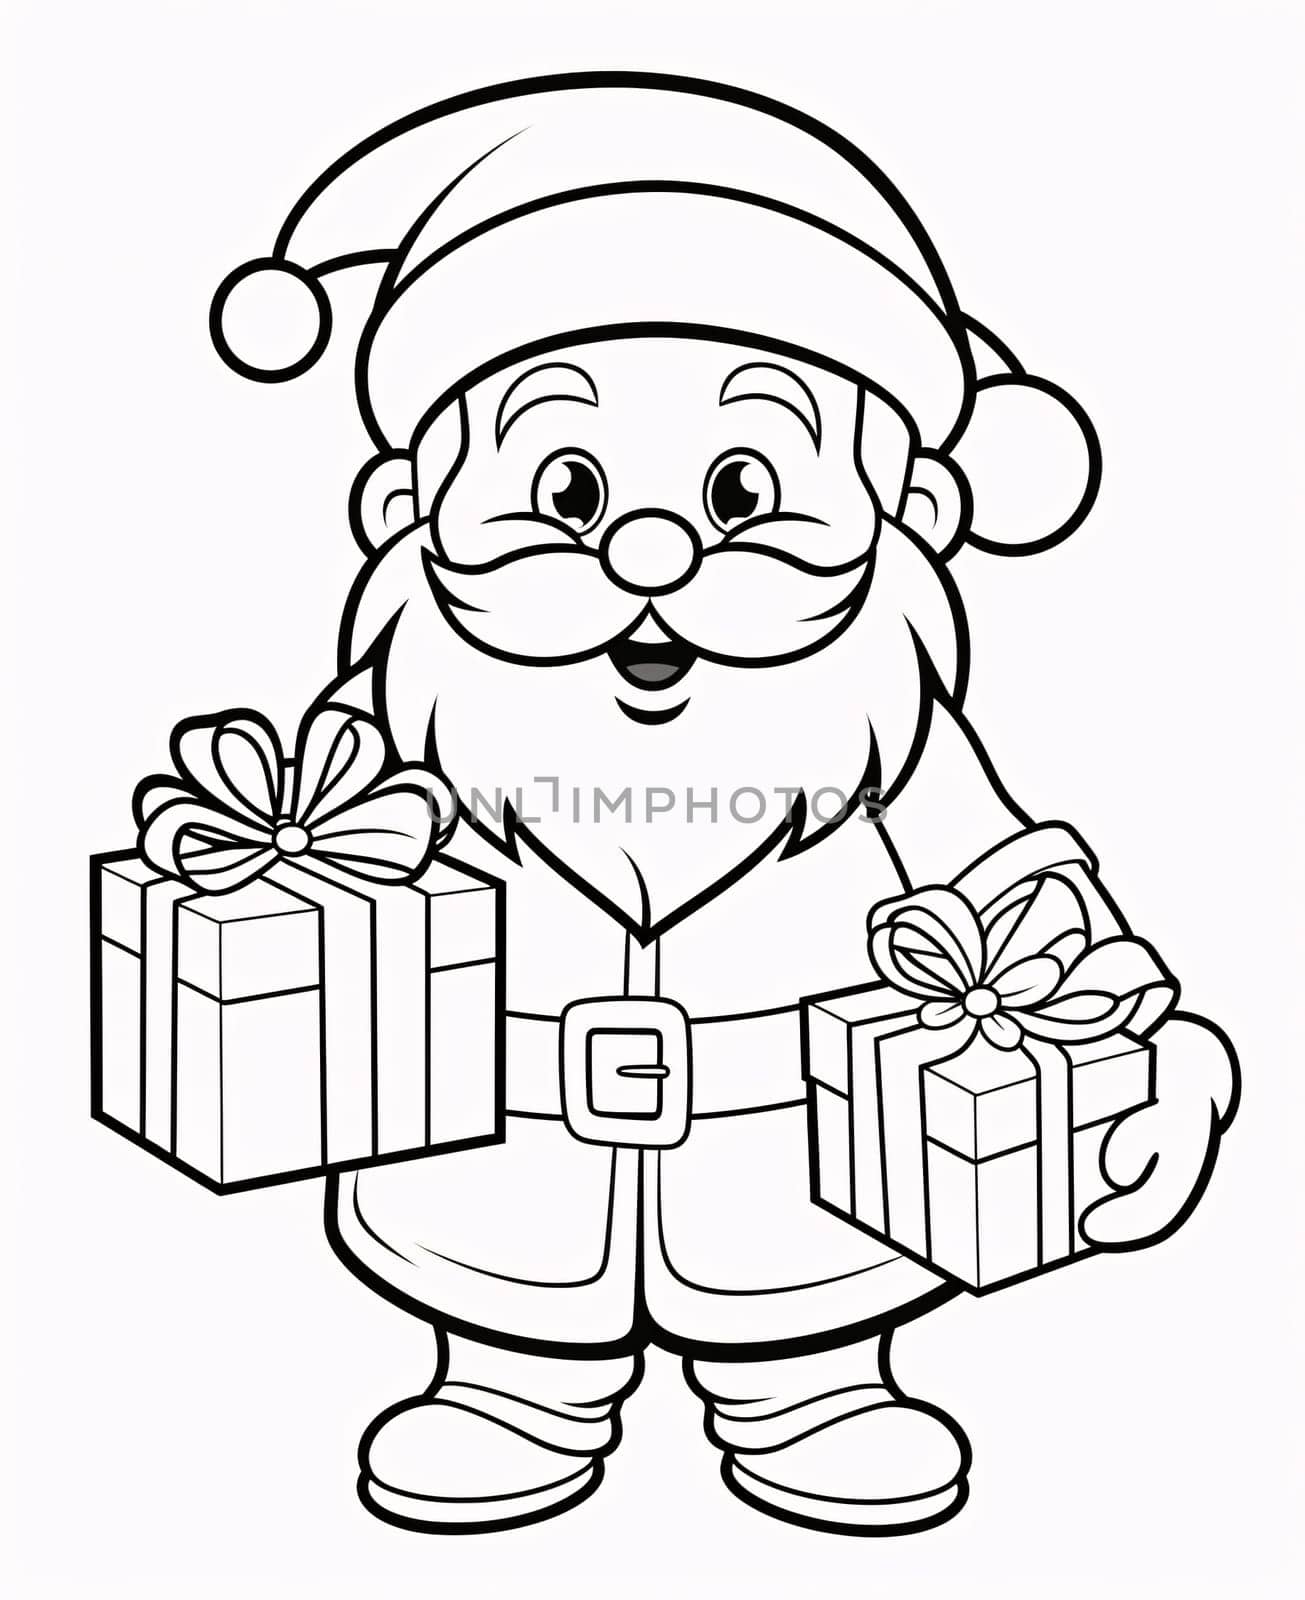 Black and white coloring sheet: Santa Claus with presents. Gifts as a day symbol of present and love. by ThemesS